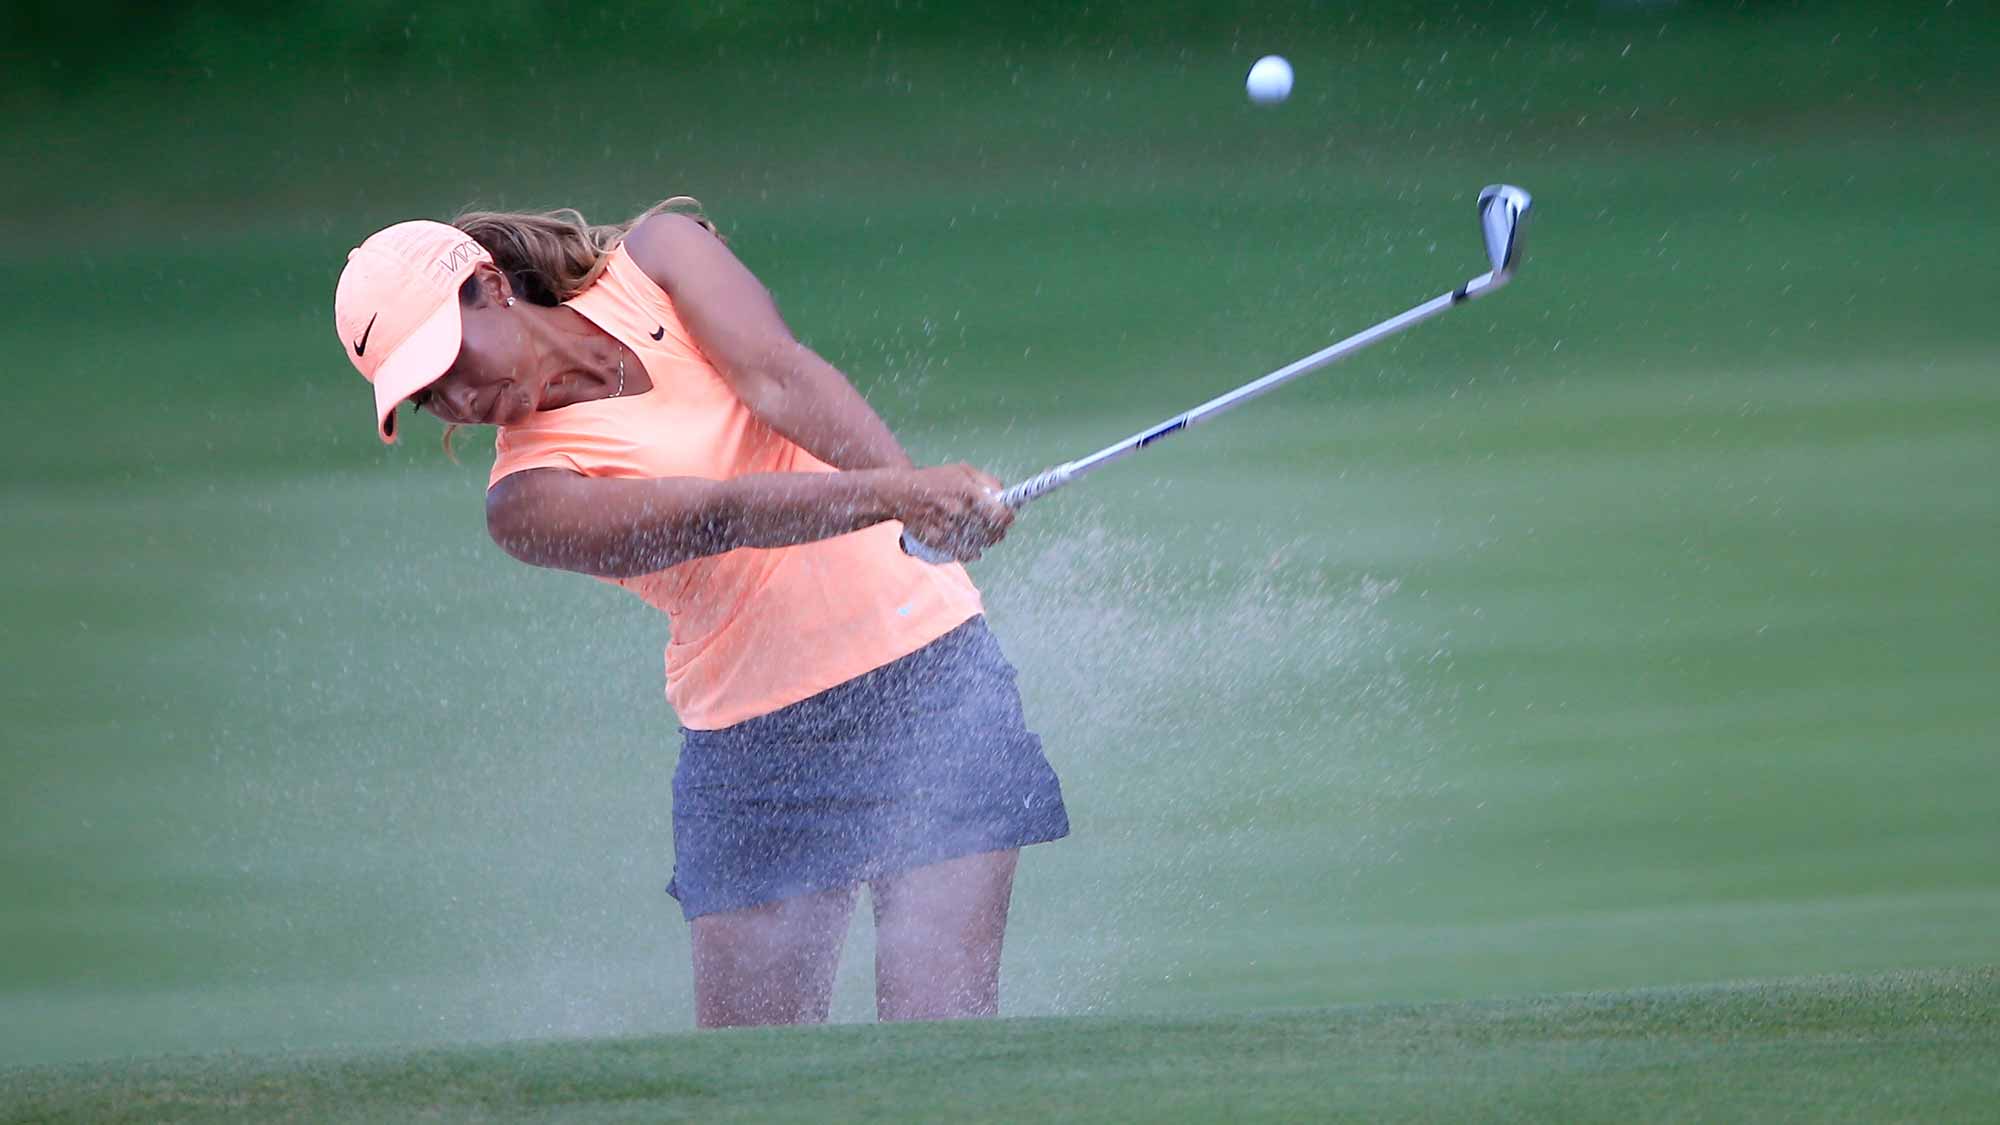 Cheyenne Woods of the United States plays a shot on the seventh hole during the first round of the Walmart NW Arkansas Championship Presented by P&G at Pinnacle Country Club